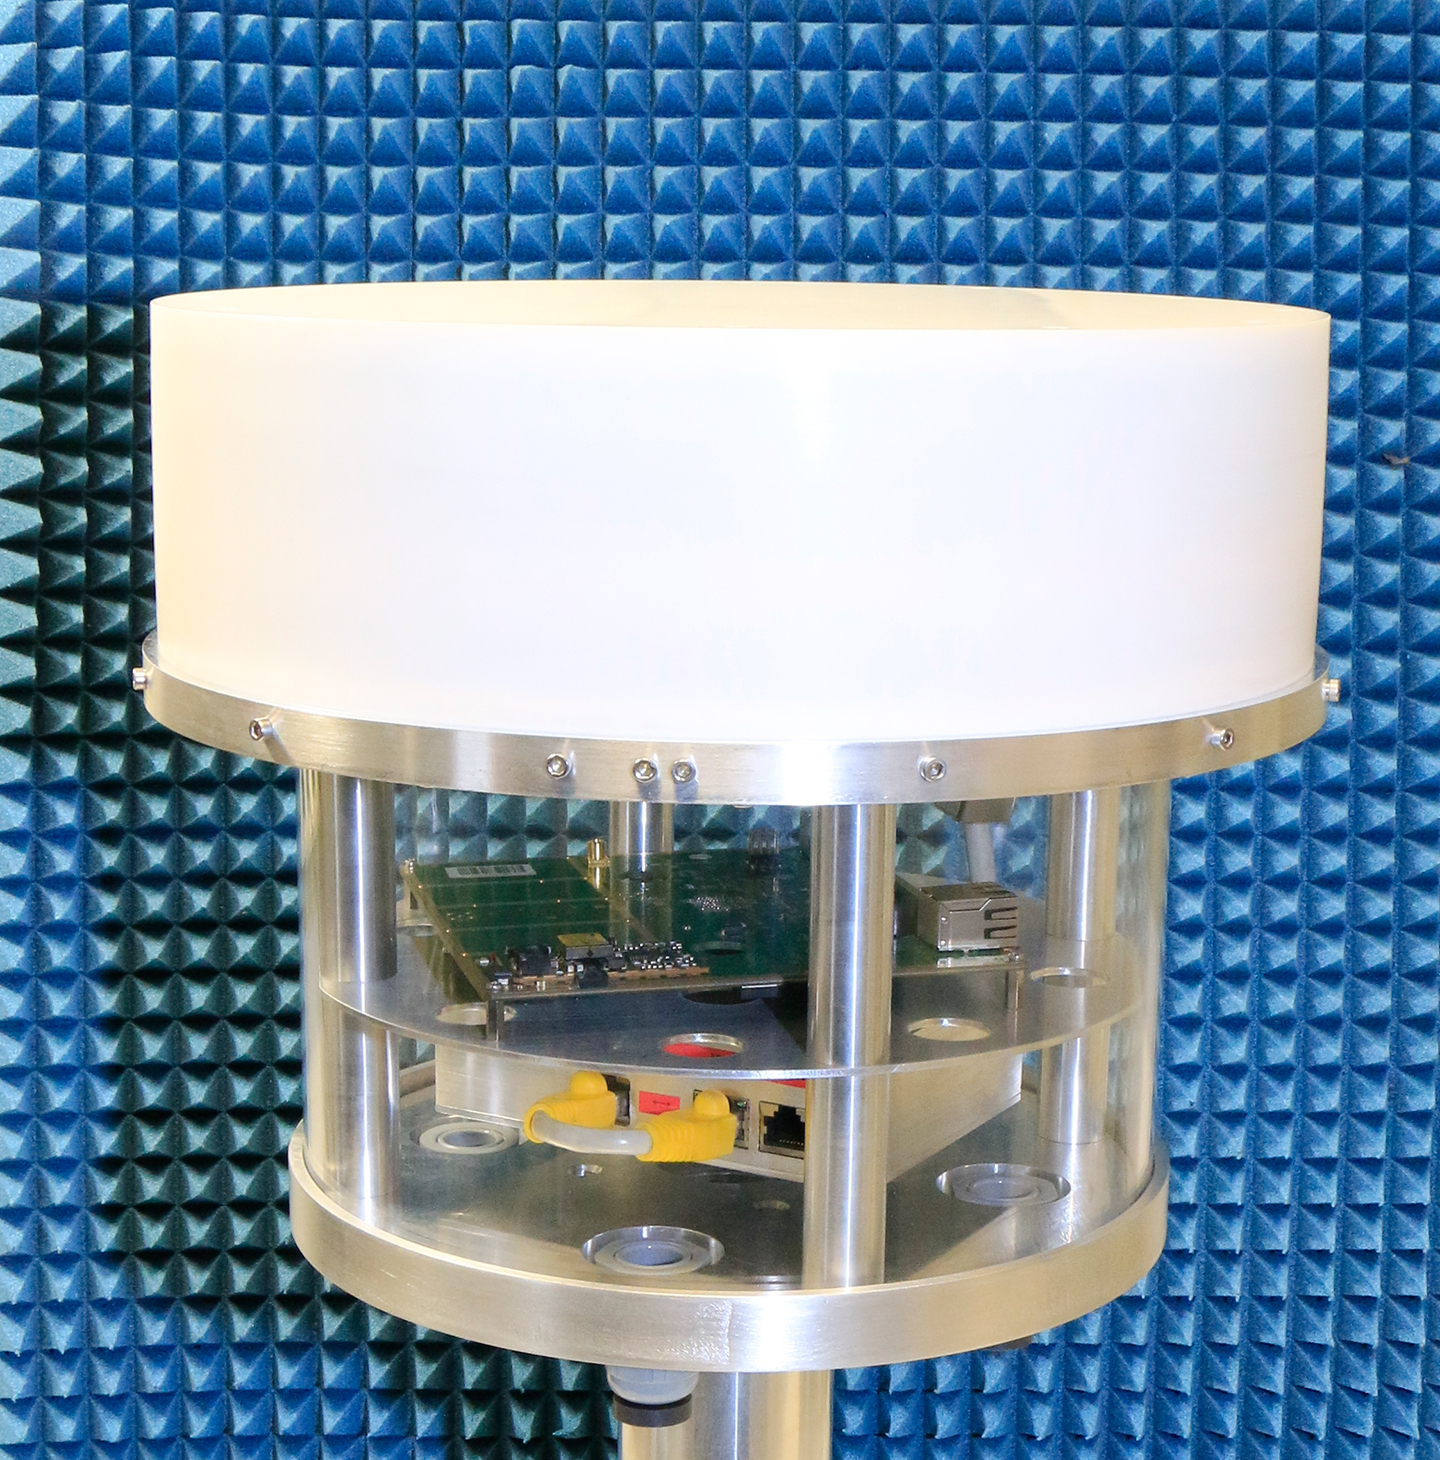 The Q-band prototype with housing for the communications and control electronics below the antenna.